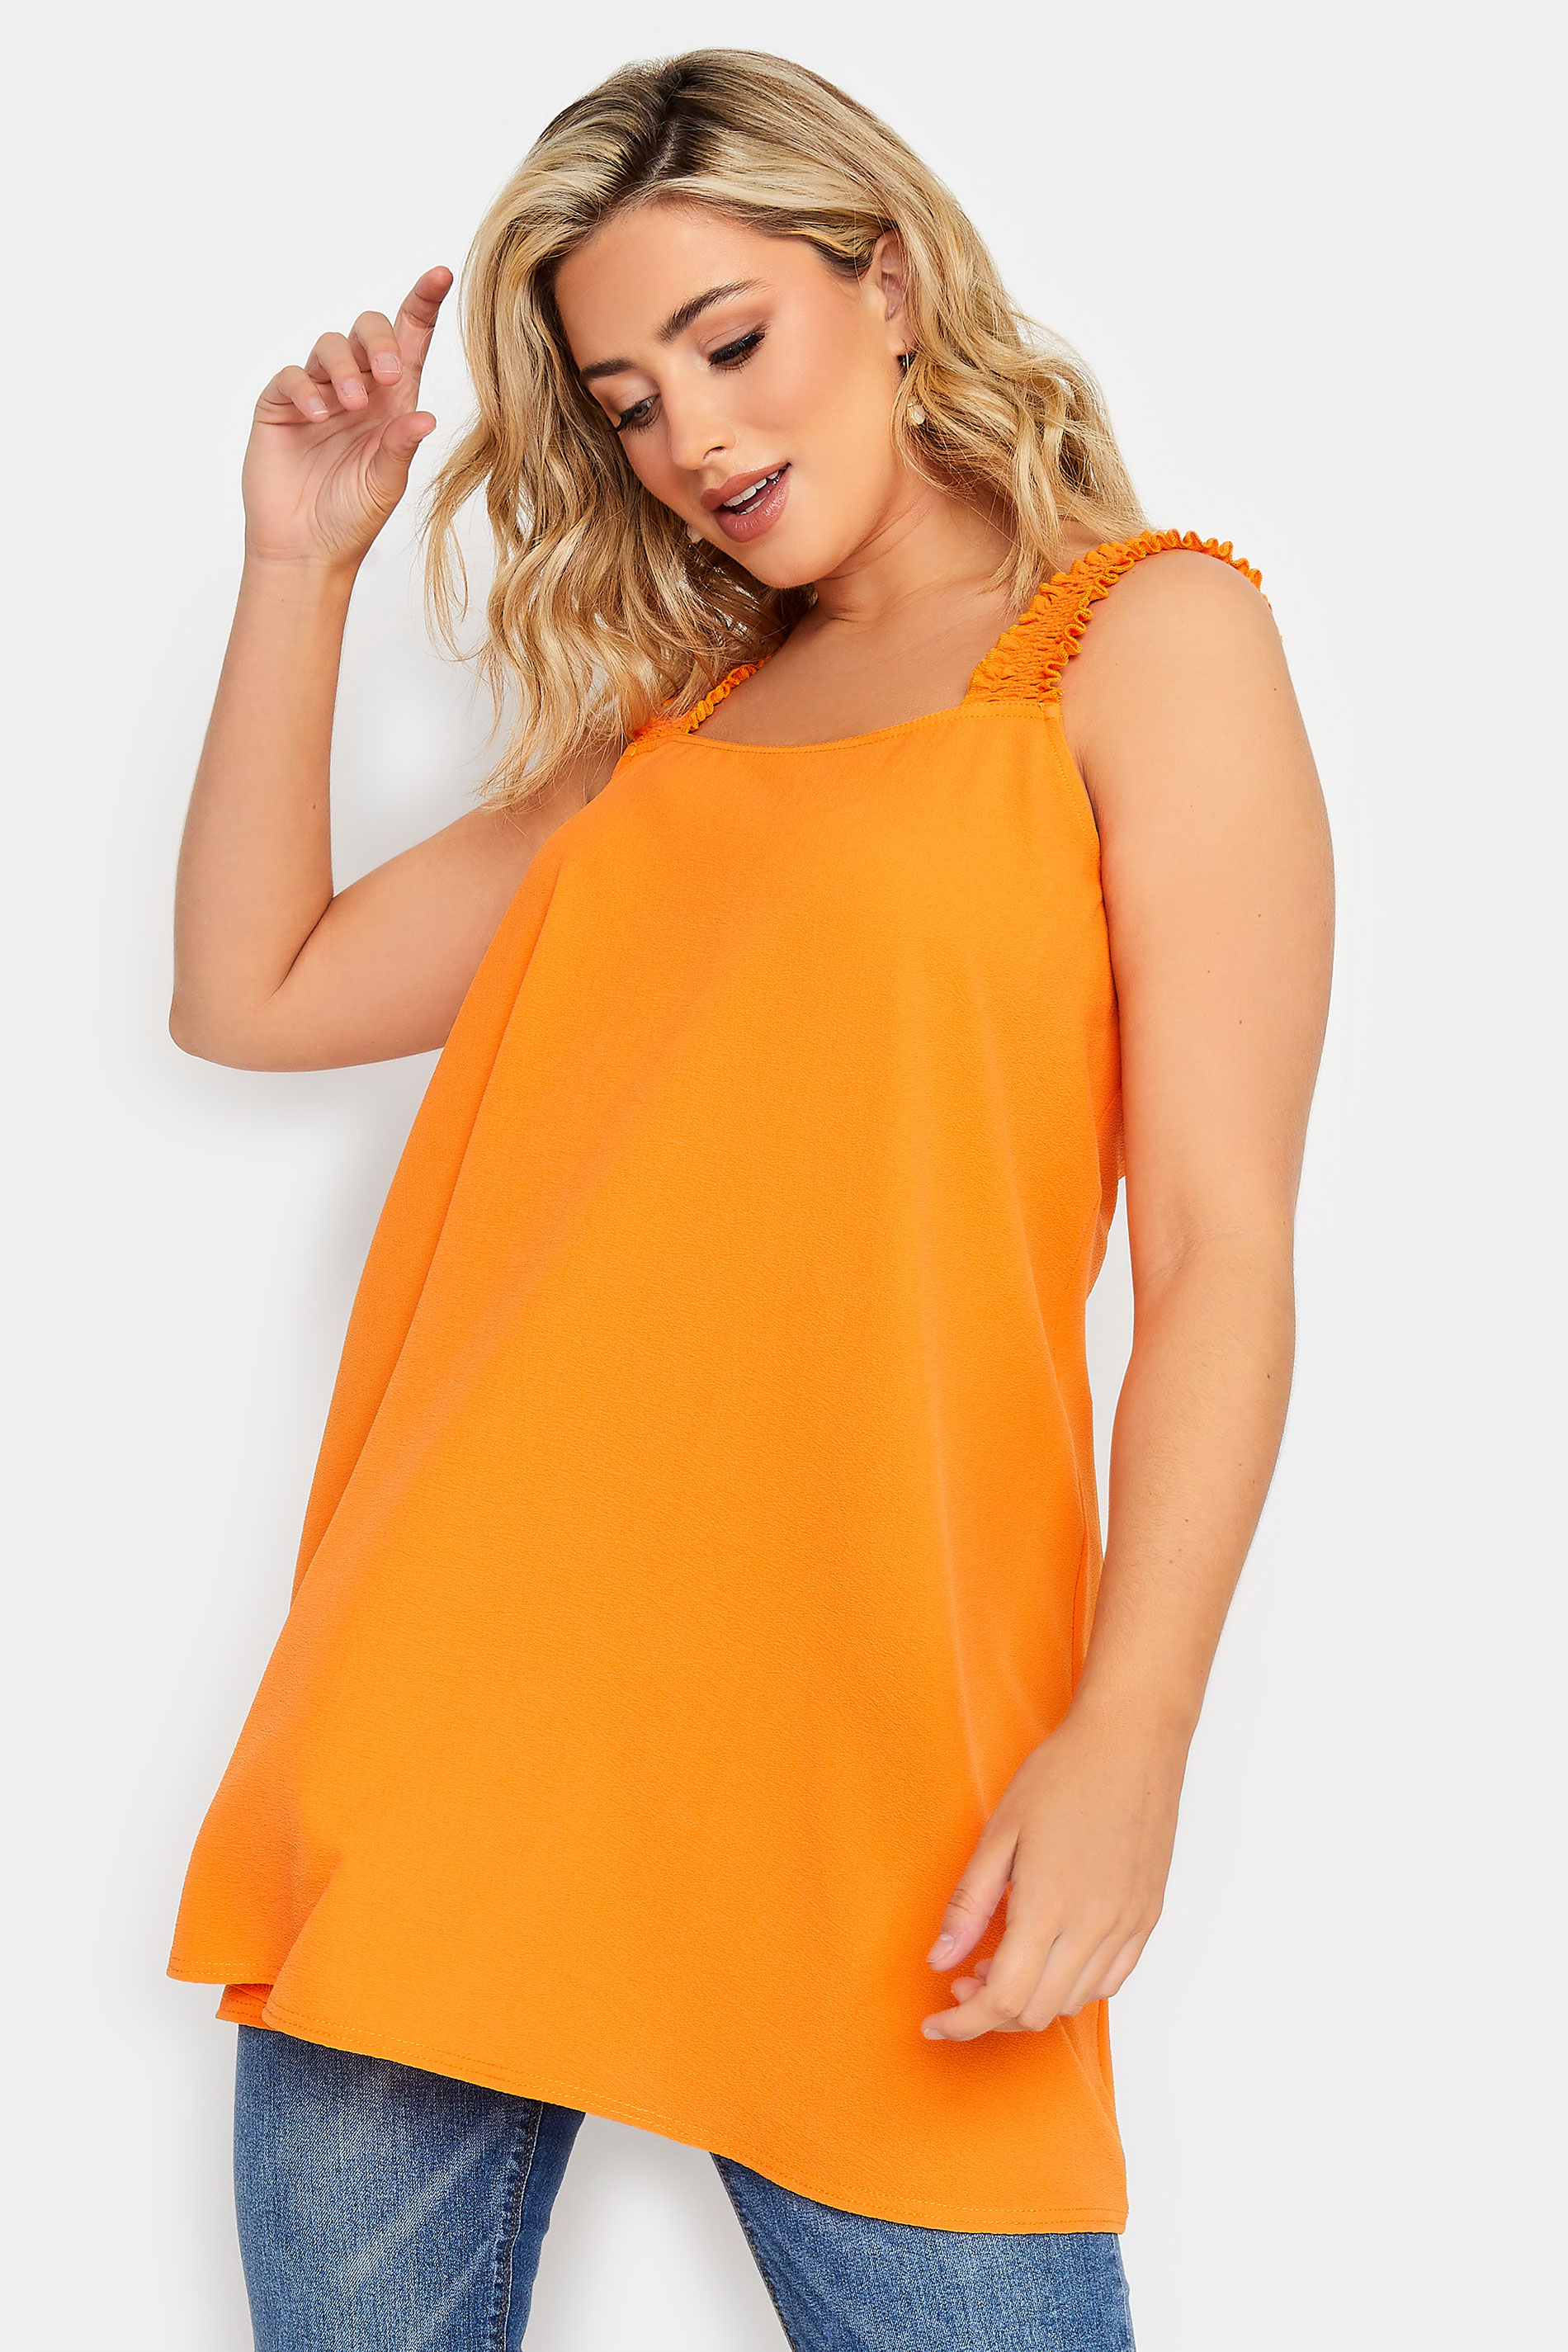 LIMITED COLLECTION Plus Size Orange Shirred Strap Cami Vest Top | Yours Clothing  2